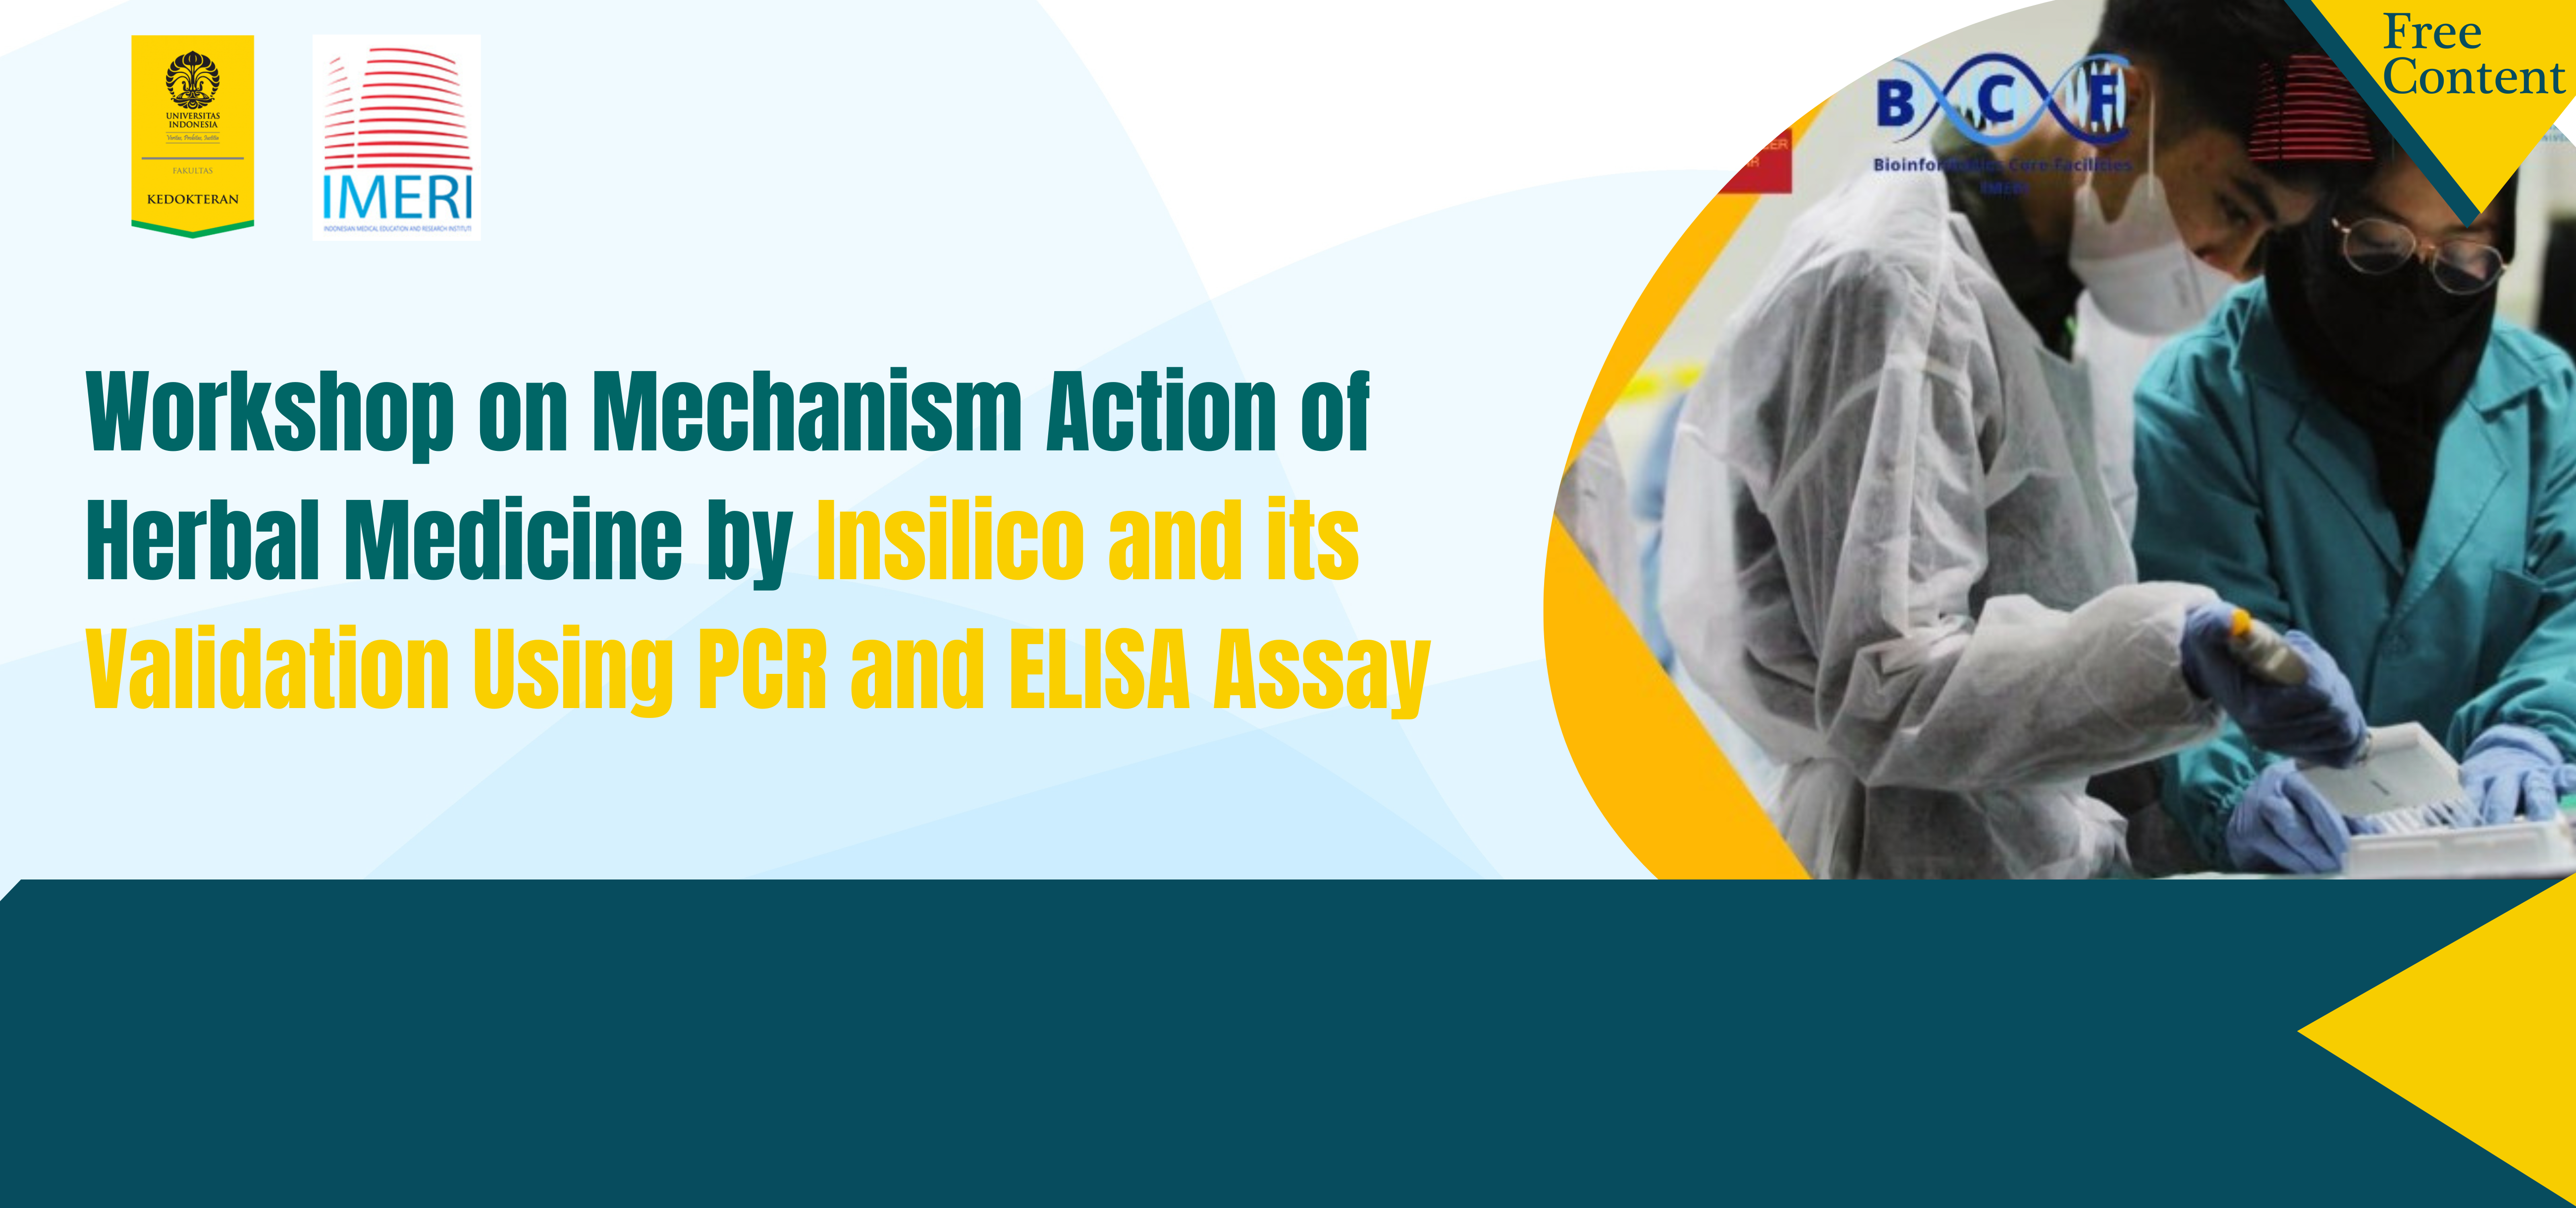 Workshop on Mechanism Action of Herbal Medicine by Insilico and its Validation Using PCR and ELISA Assay